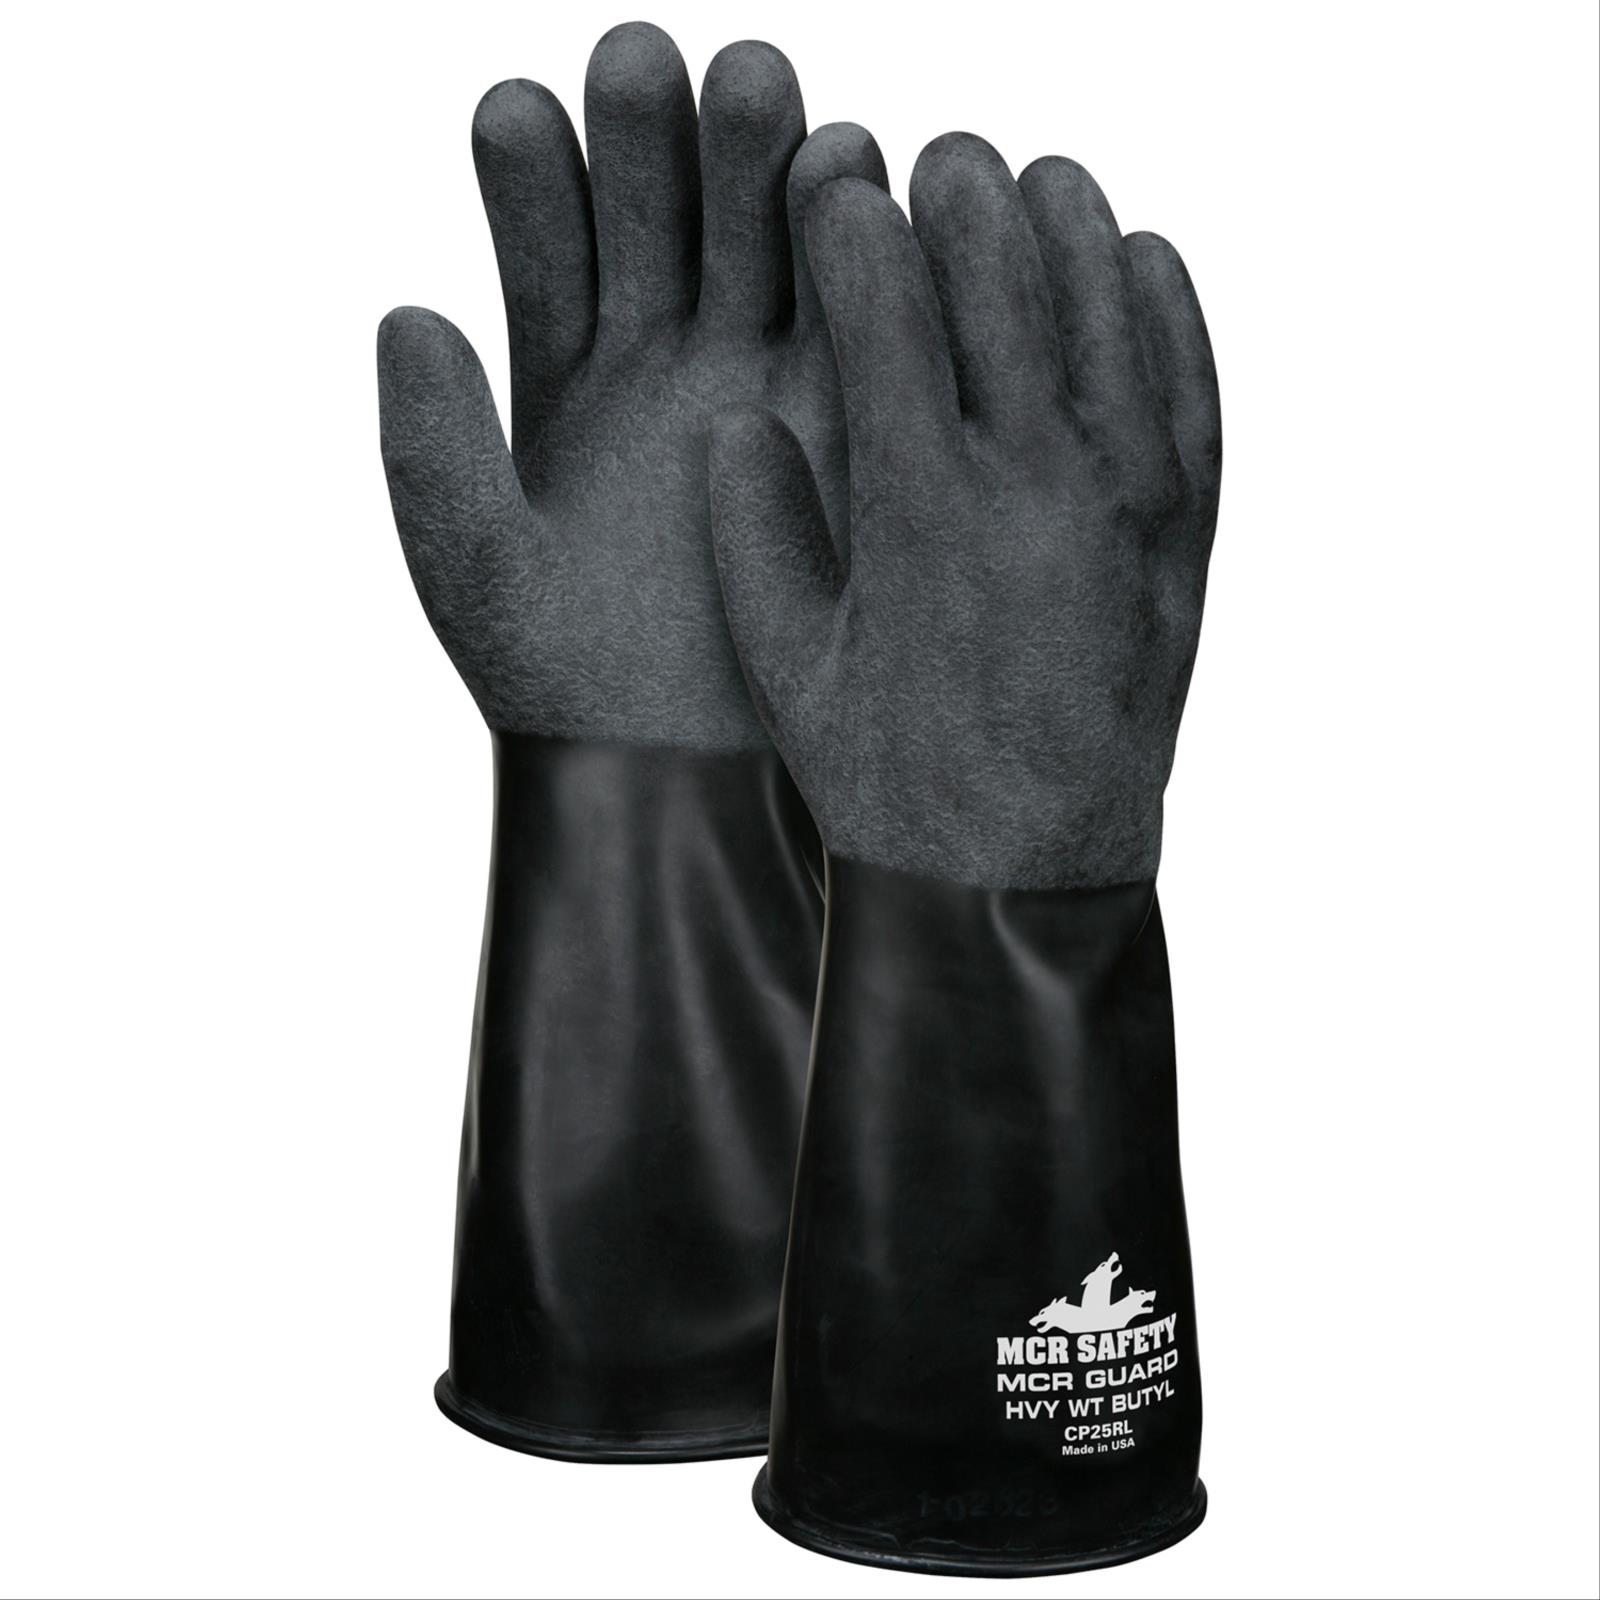 Butyl Rubber Glove with Rough Finish, Gauntlet Rolled Cuff